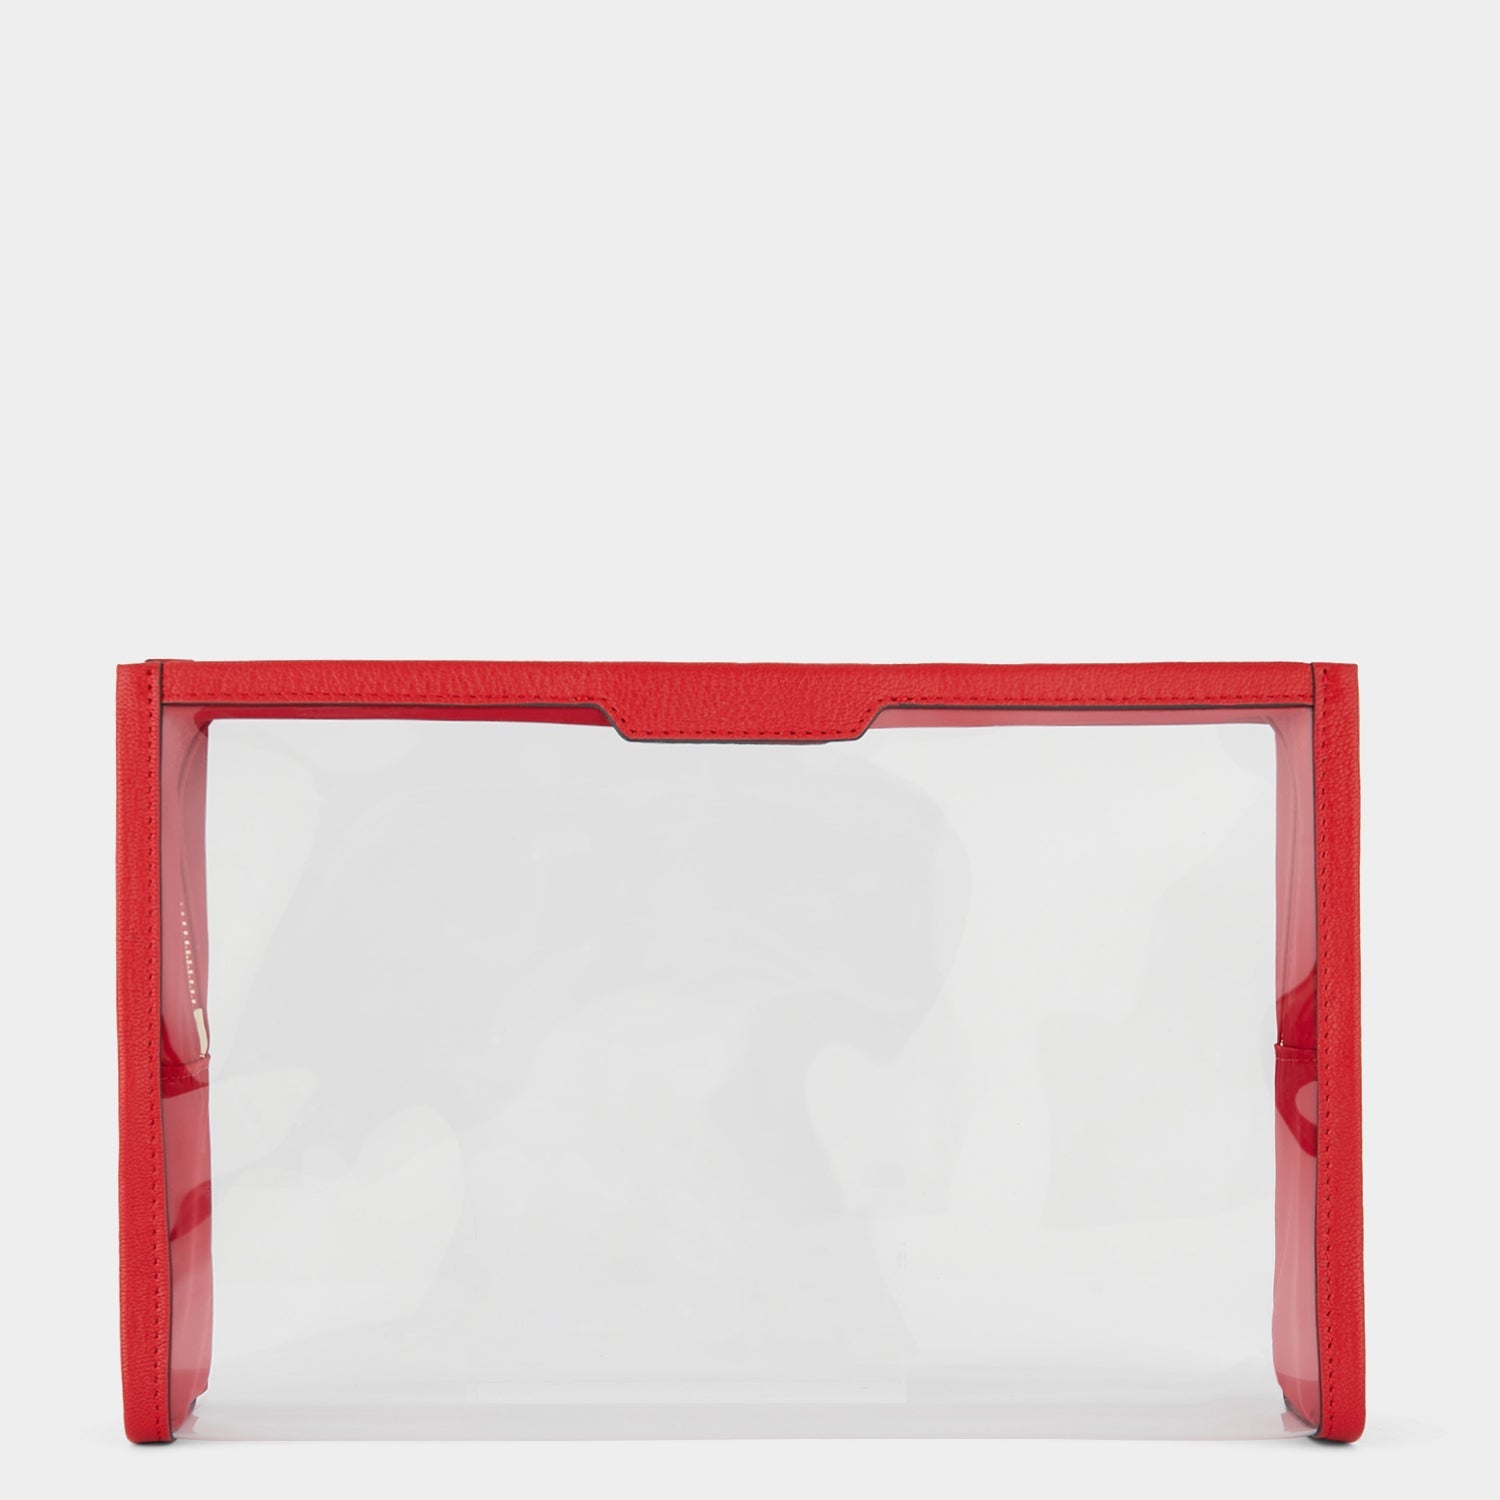 Big Pouch -

                  
                    Capra in Red -
                  

                  Anya Hindmarch US
